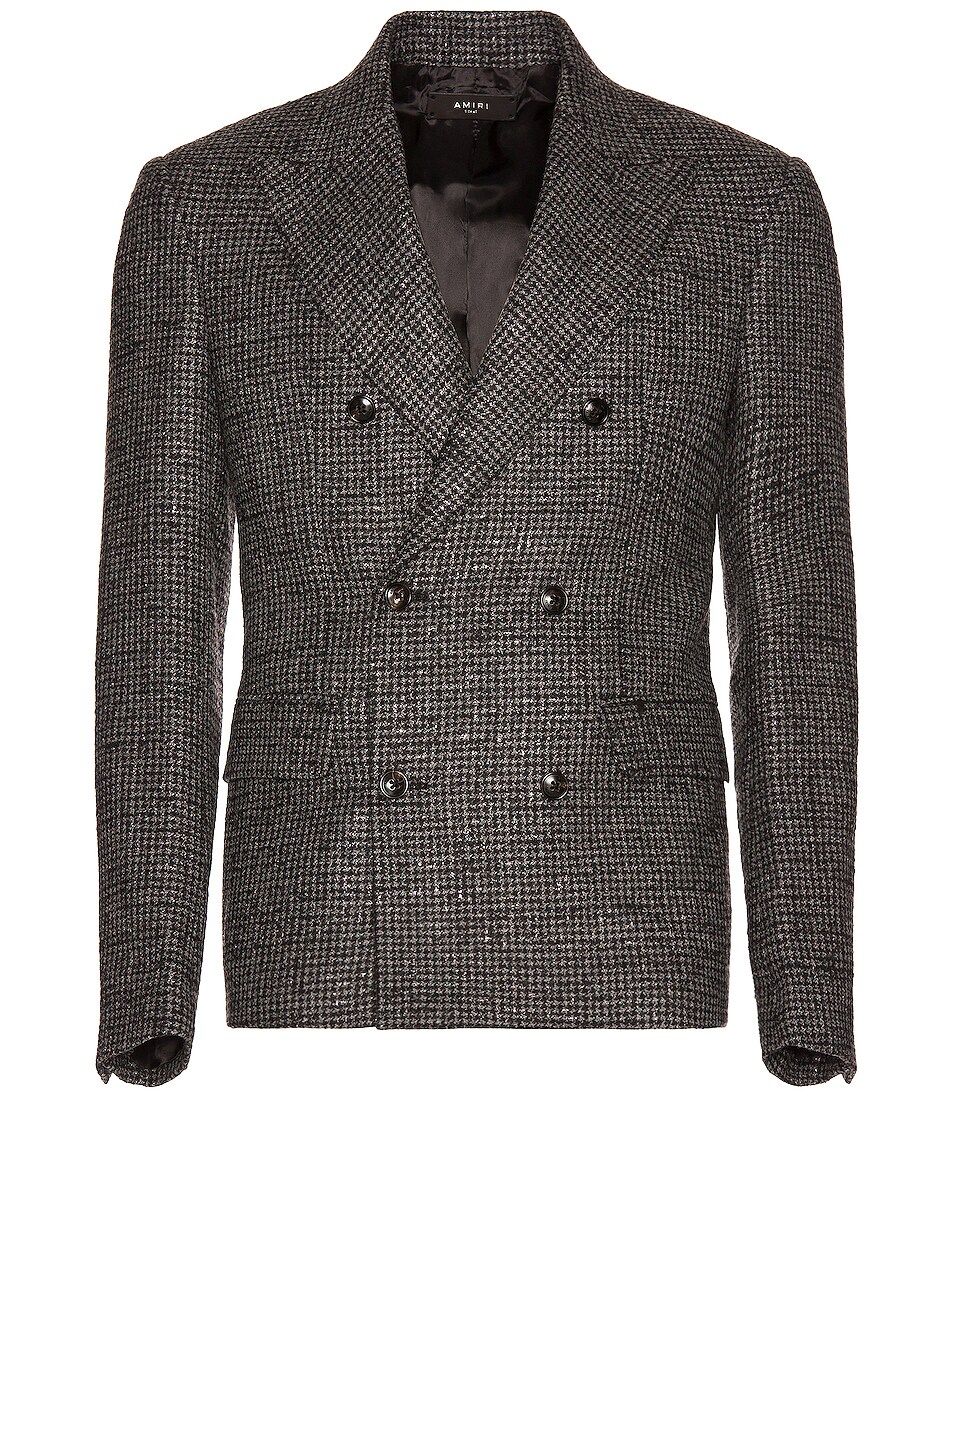 Image 1 of Amiri Houndstooth Lurex Double Breasted Jacket in Black